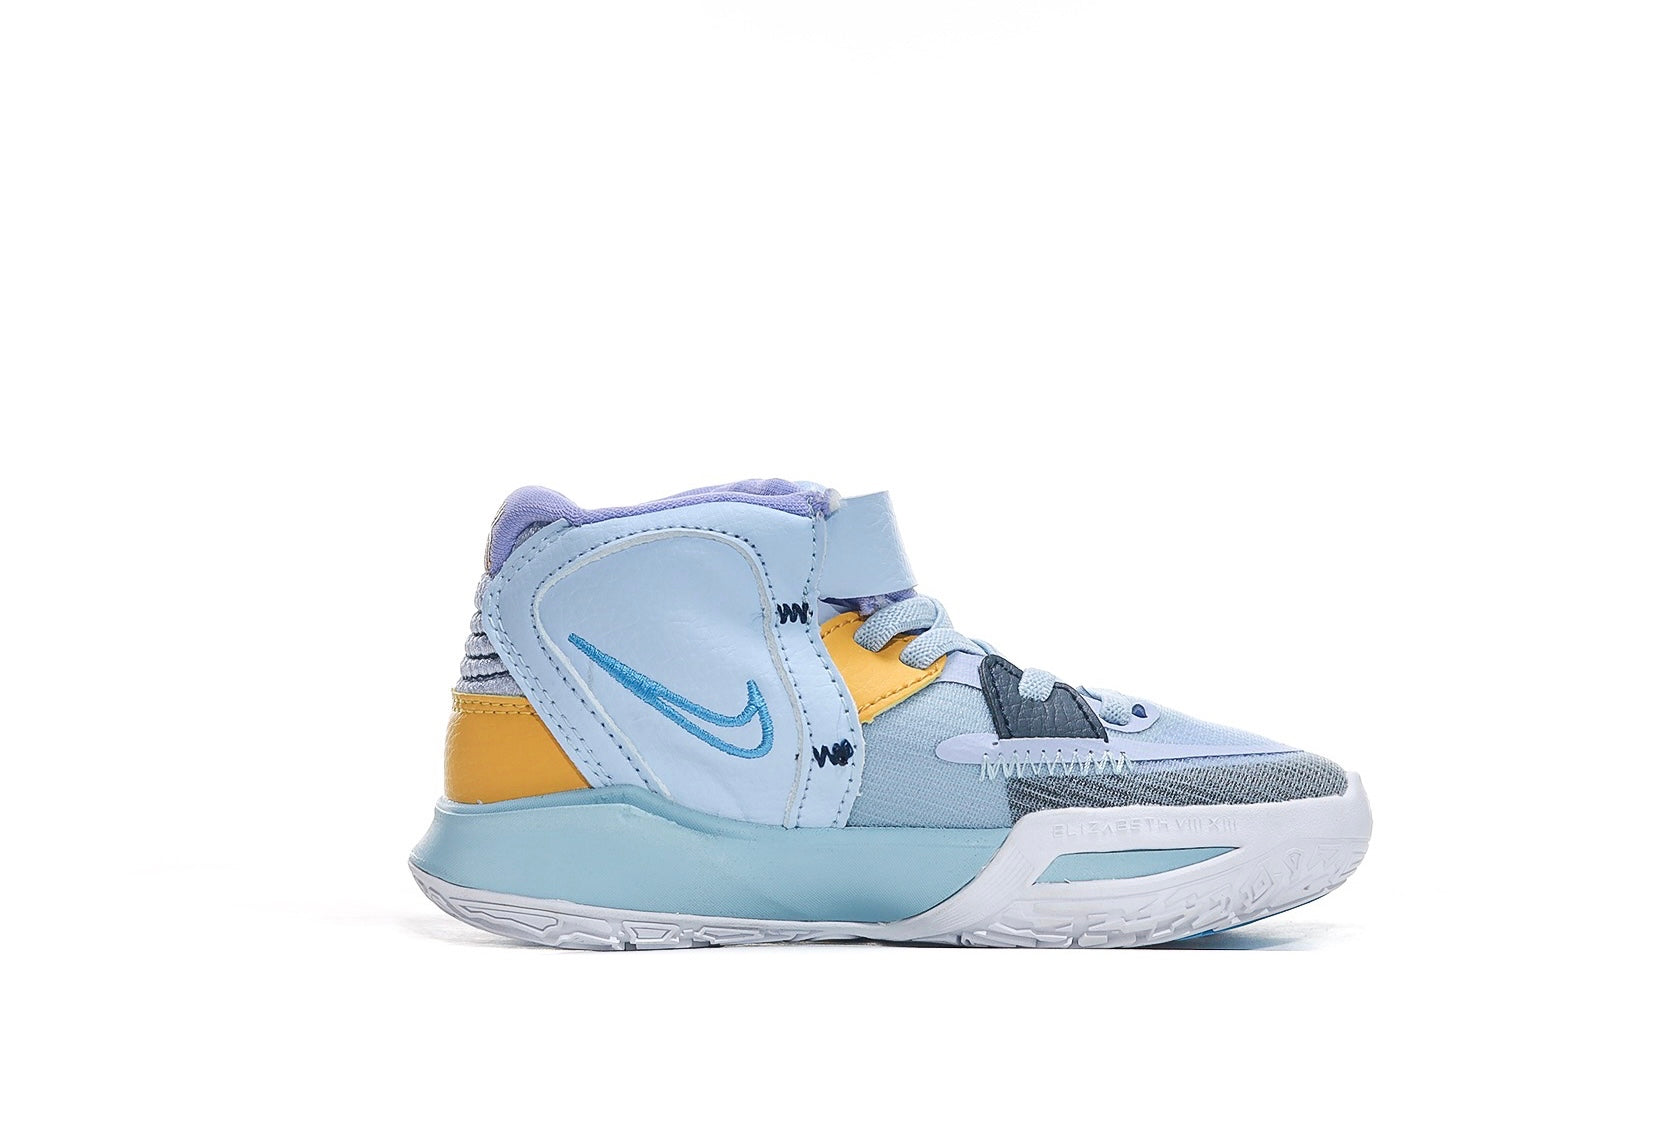 Nike kyrie infinity EP baby blue shoes